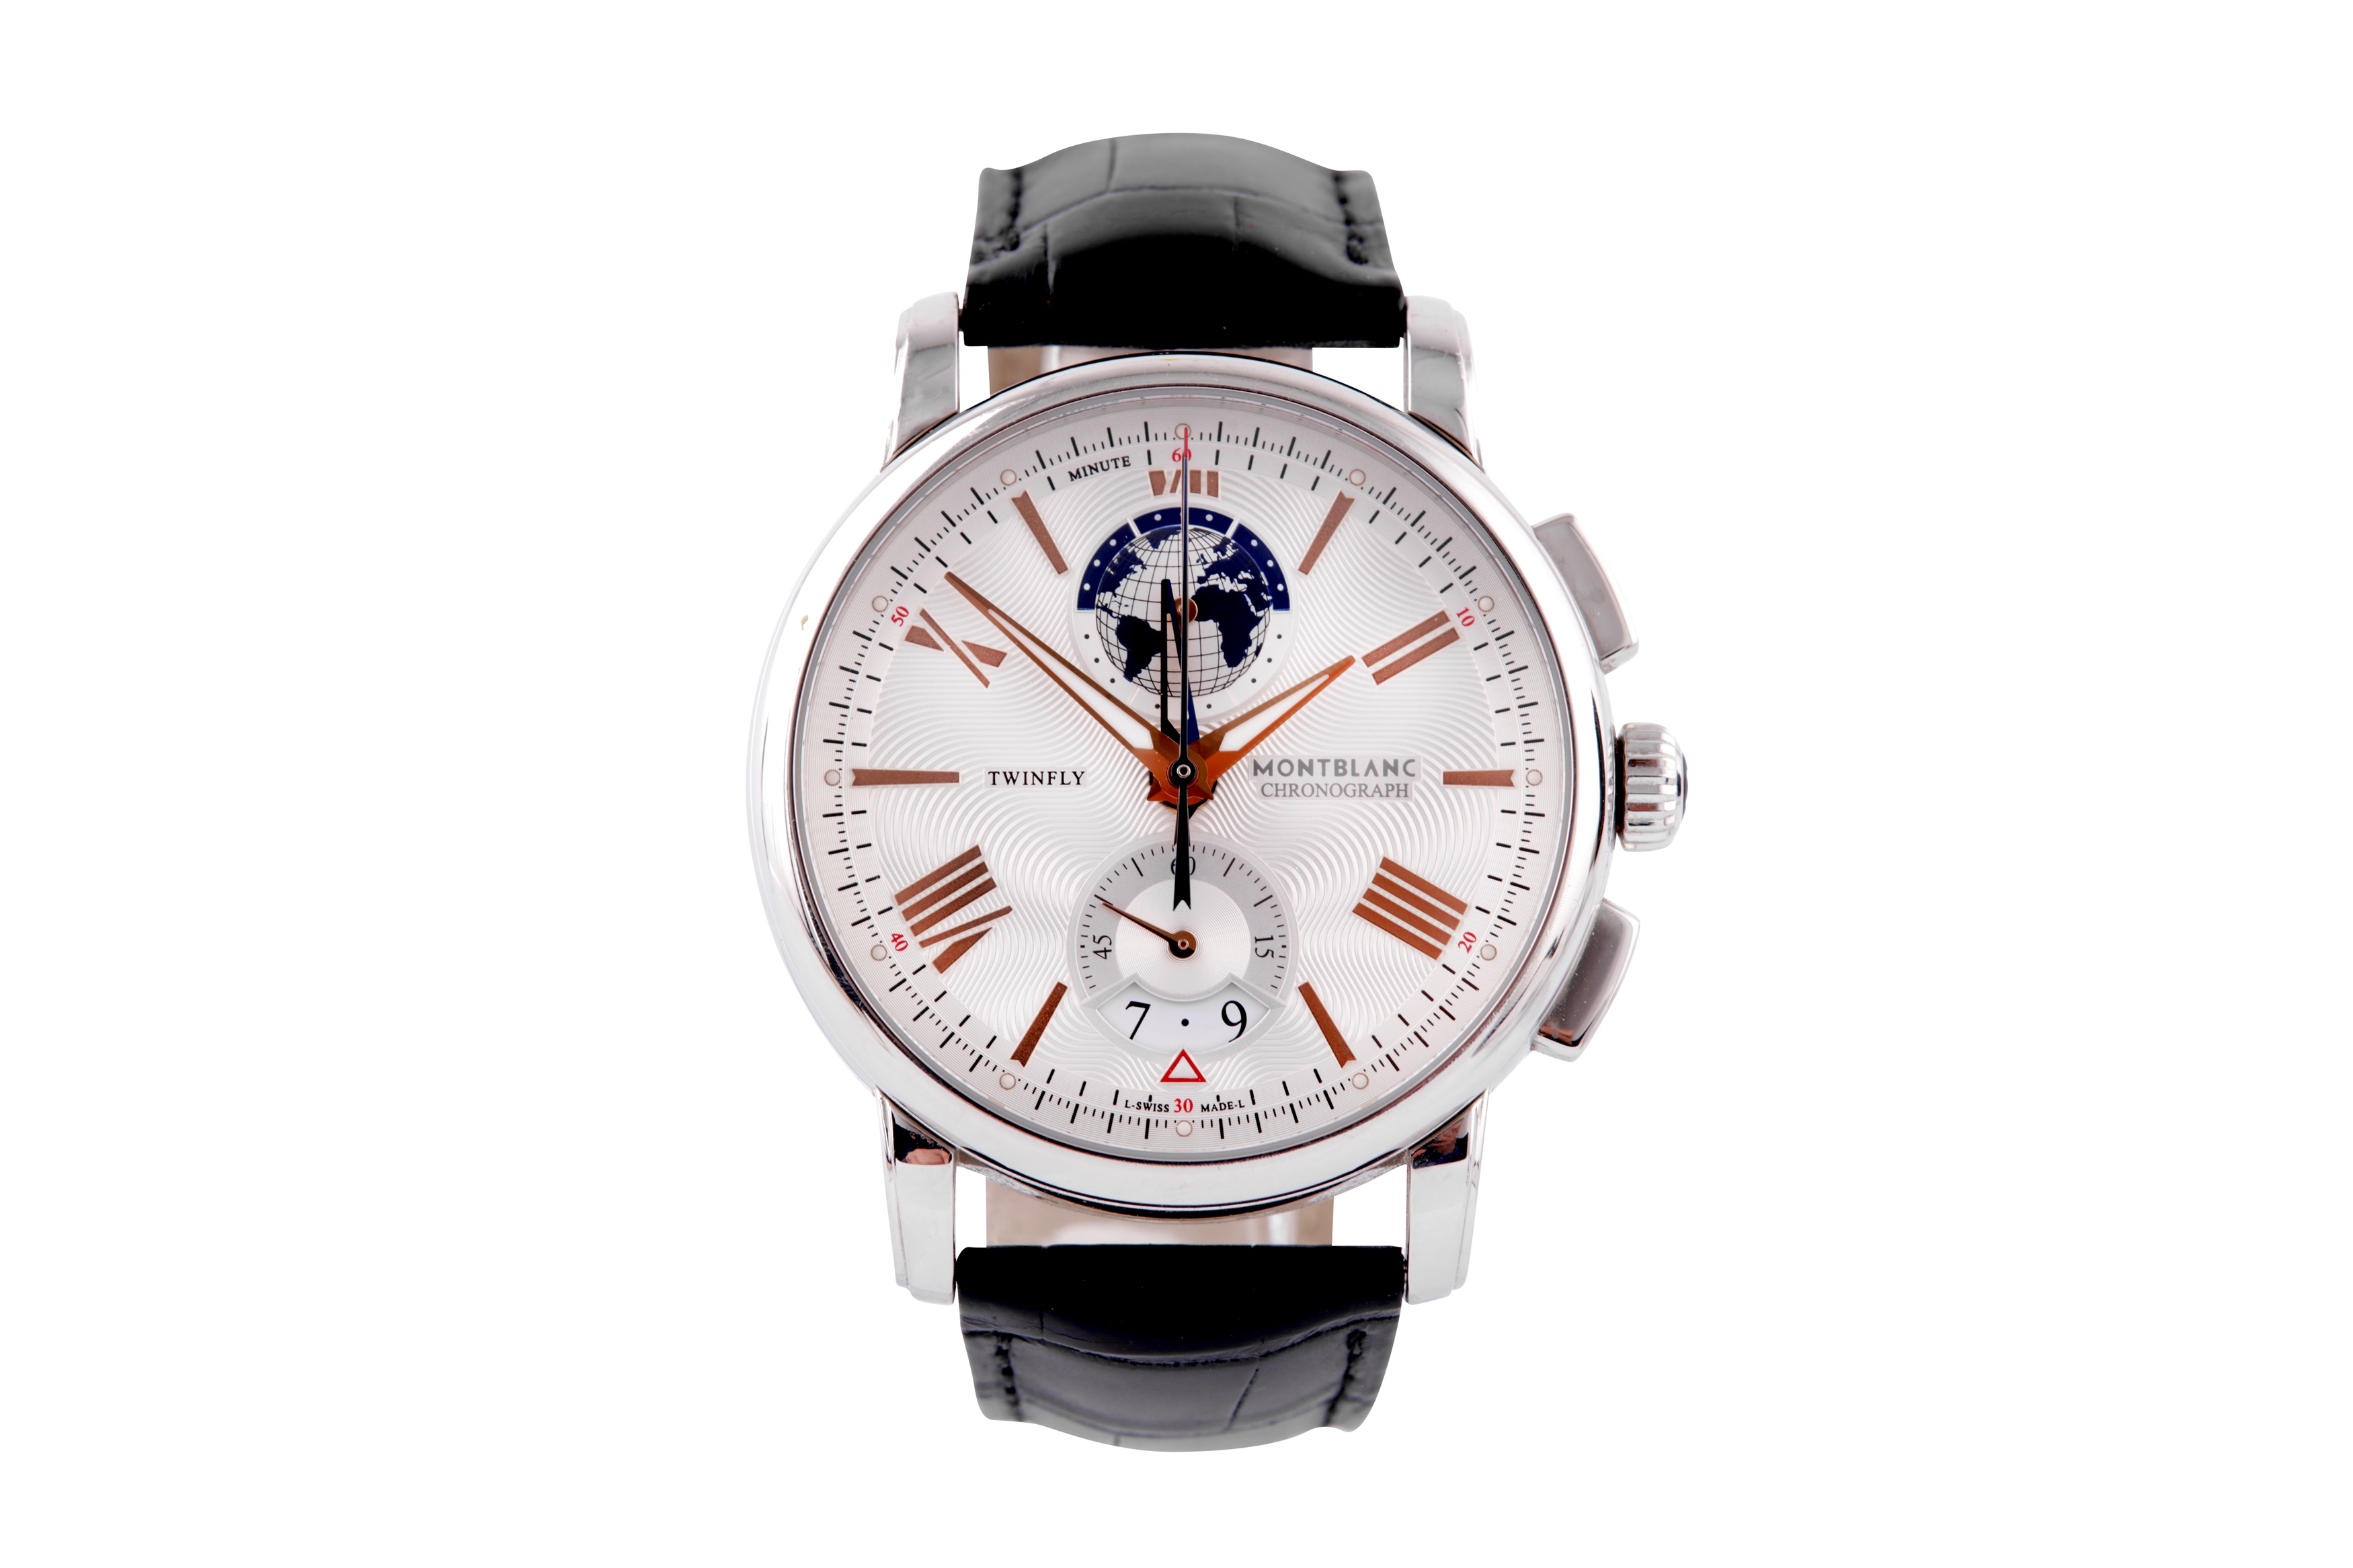 MONTBLANC. 4810 TWINFLY CHRONOGRAPH 110 YEARS EDITION - Image 2 of 8